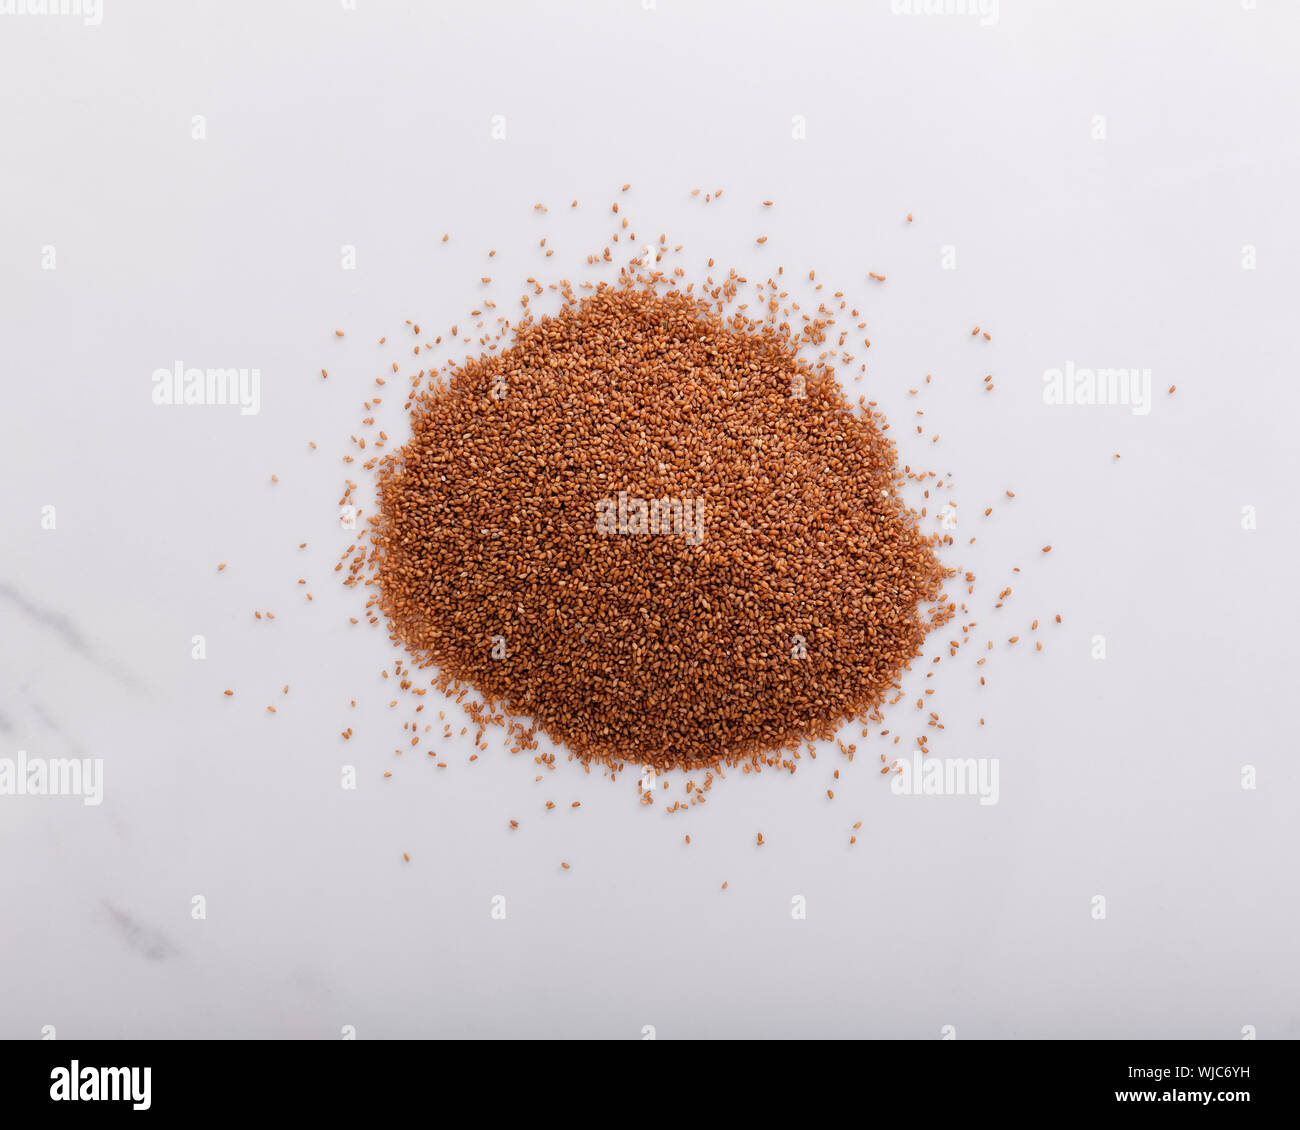 Teff grain piled and seen from above Stock Photo